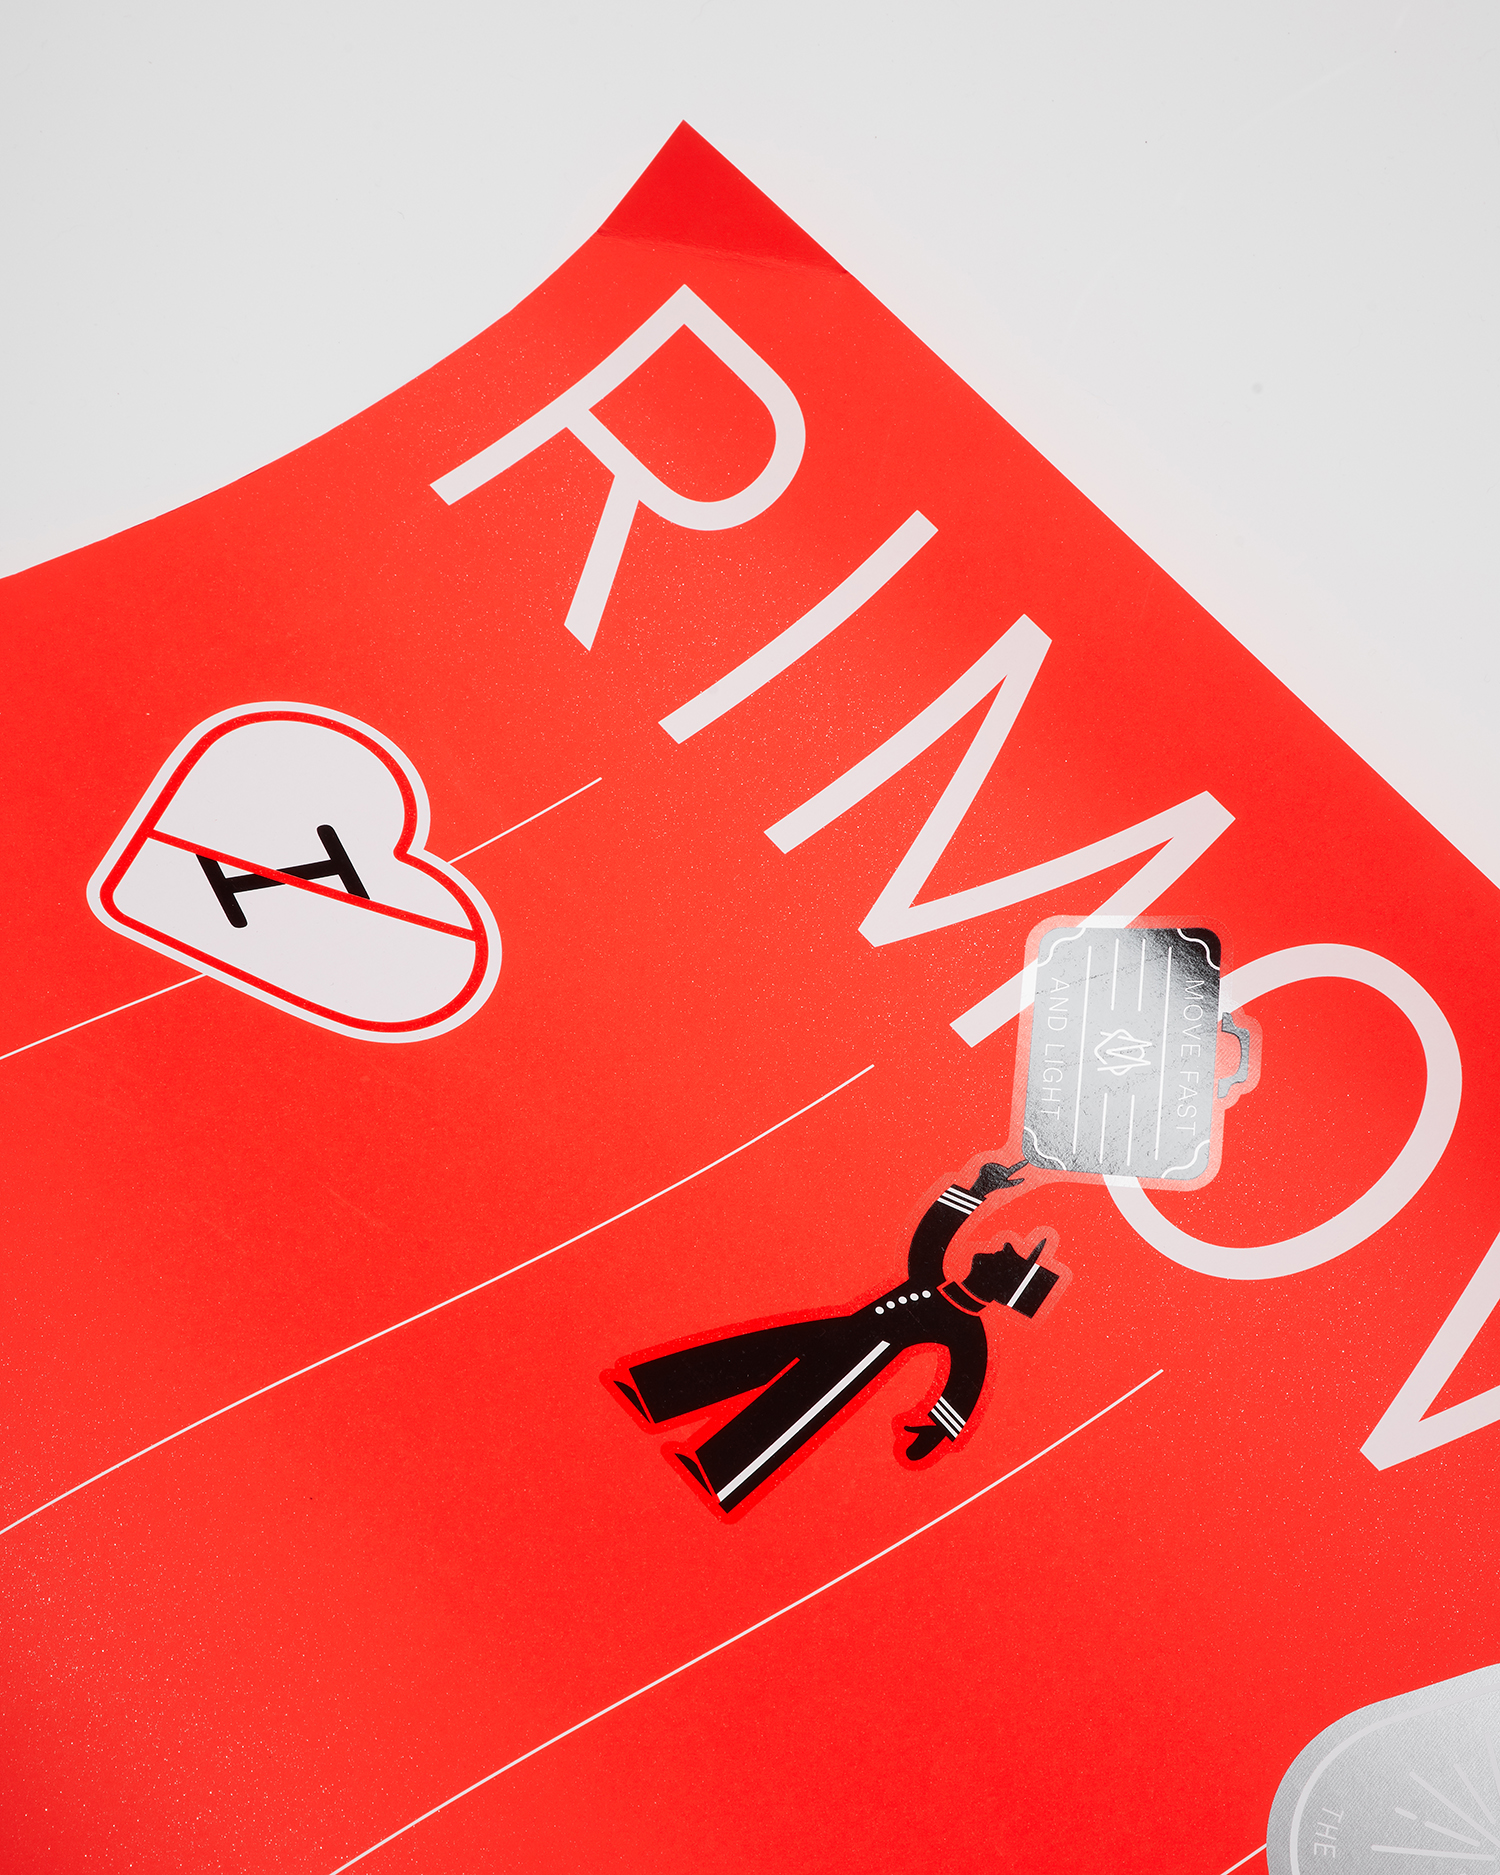 Poster and stickers designed by Commission studio for functional luxury luggage manufacturer Rimowa